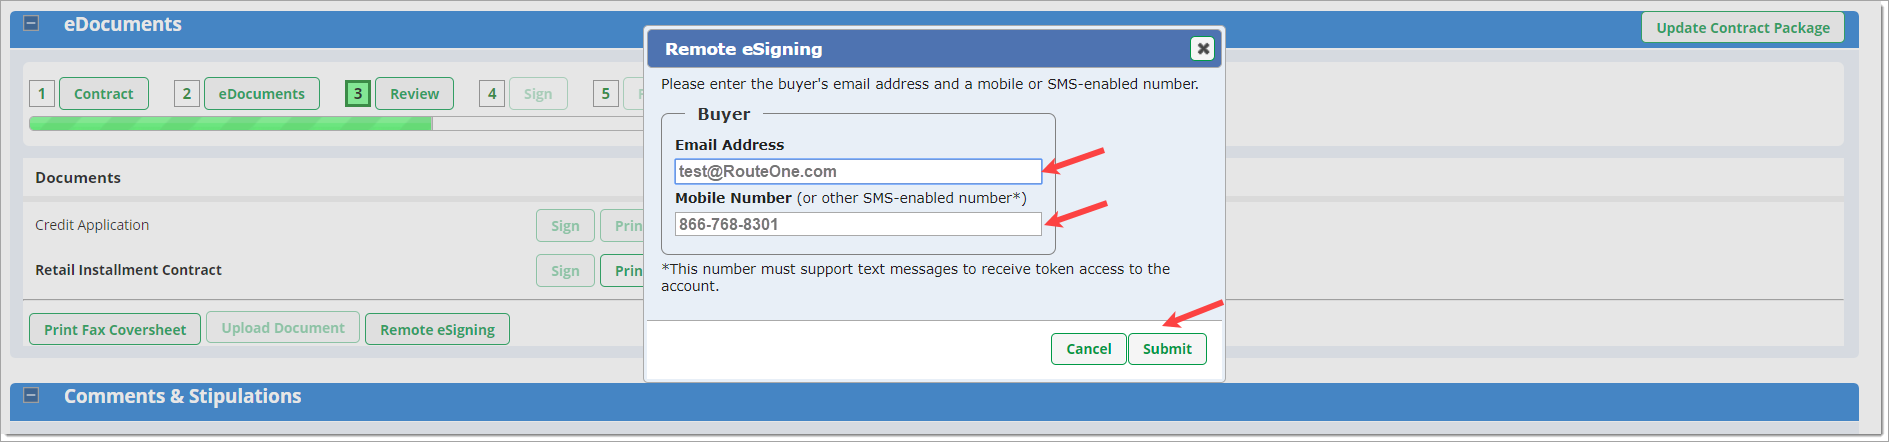 Arrows pointing to buyer information and 'Submit' button.